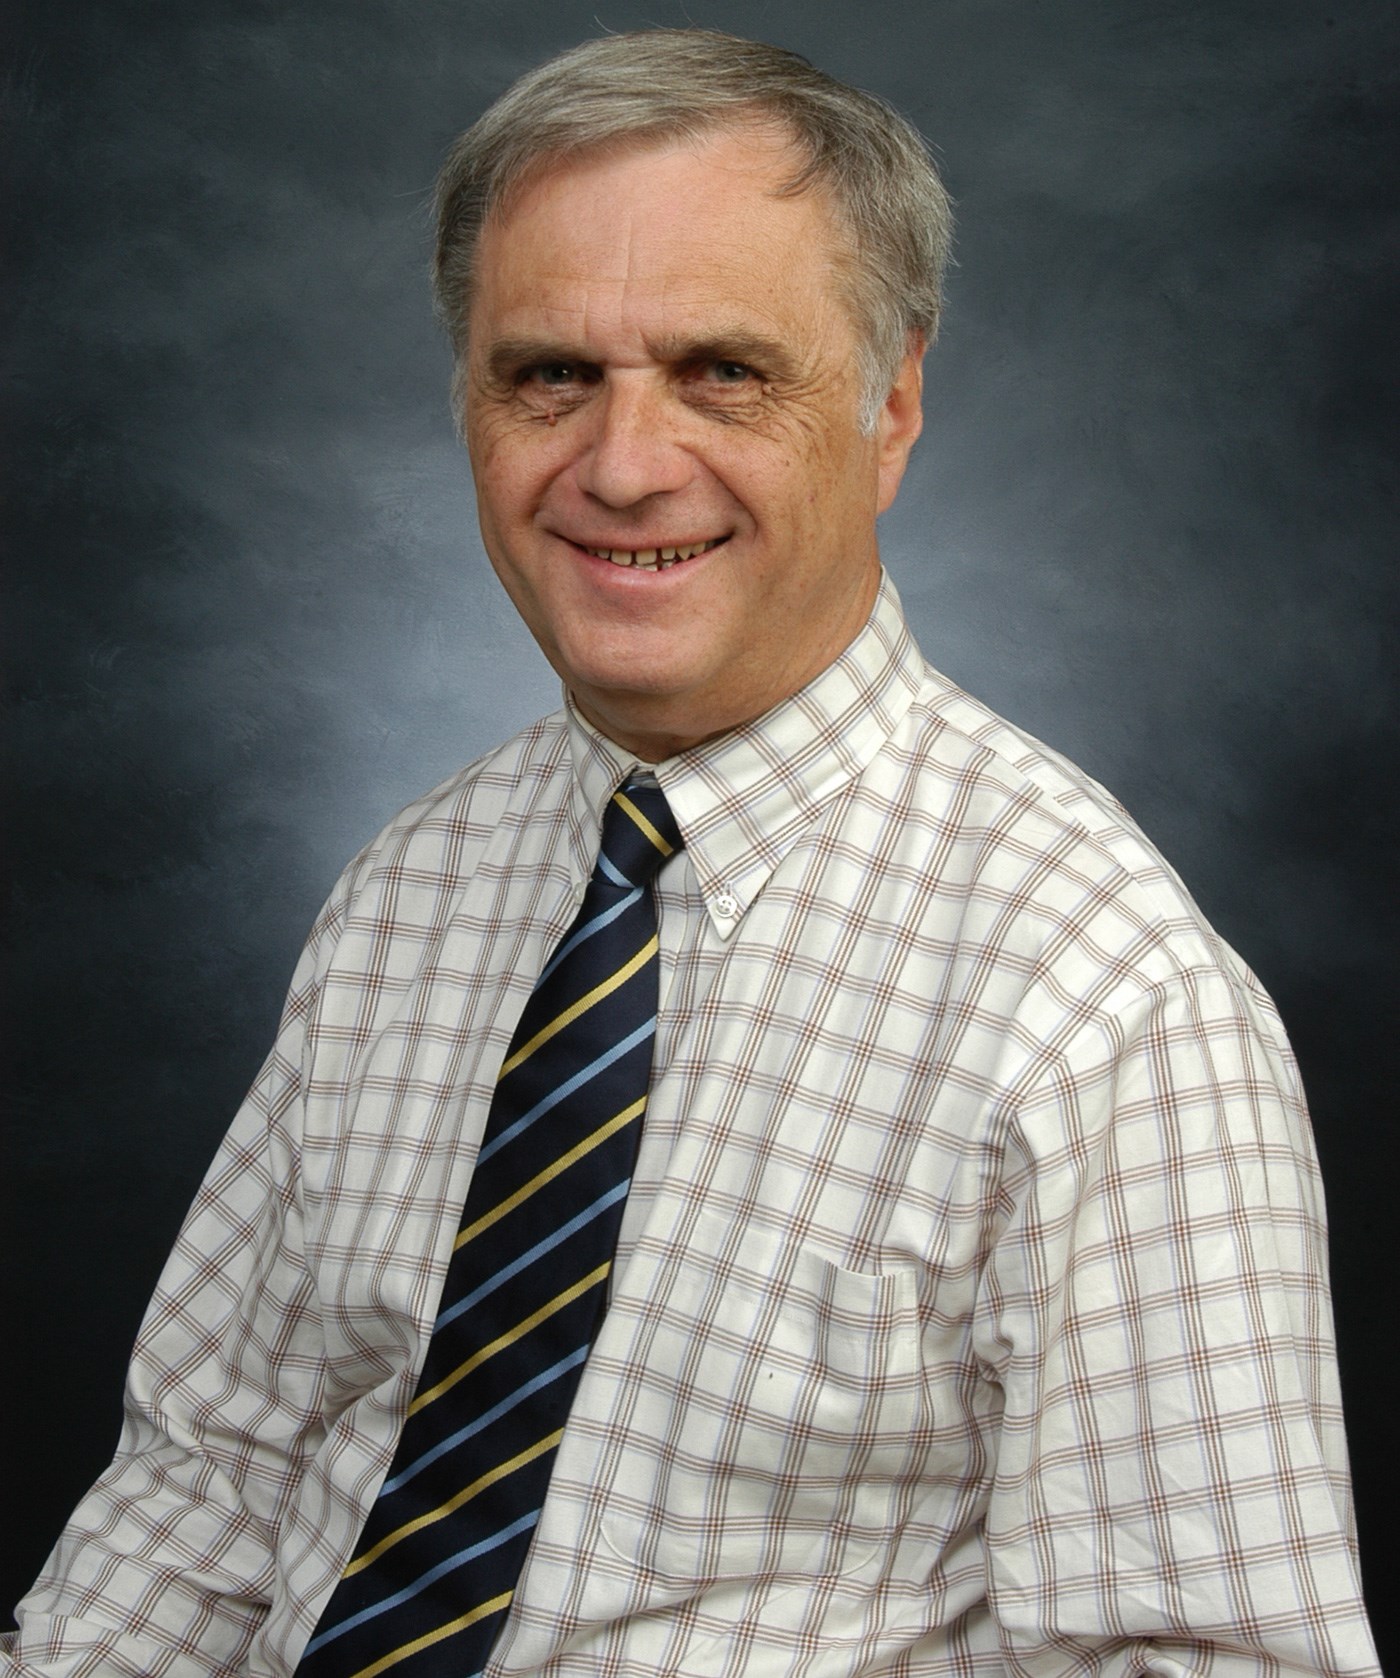 Arnold O’ Brien is Professor Emeritus at UMASS Lowell. He joined the faculty in 1969 and achieved the rank of full professor in 1983.  He has offered courses covering a wide range of areas and served as Department Chair in EEAS from 1976 until his retirement in 2010. 